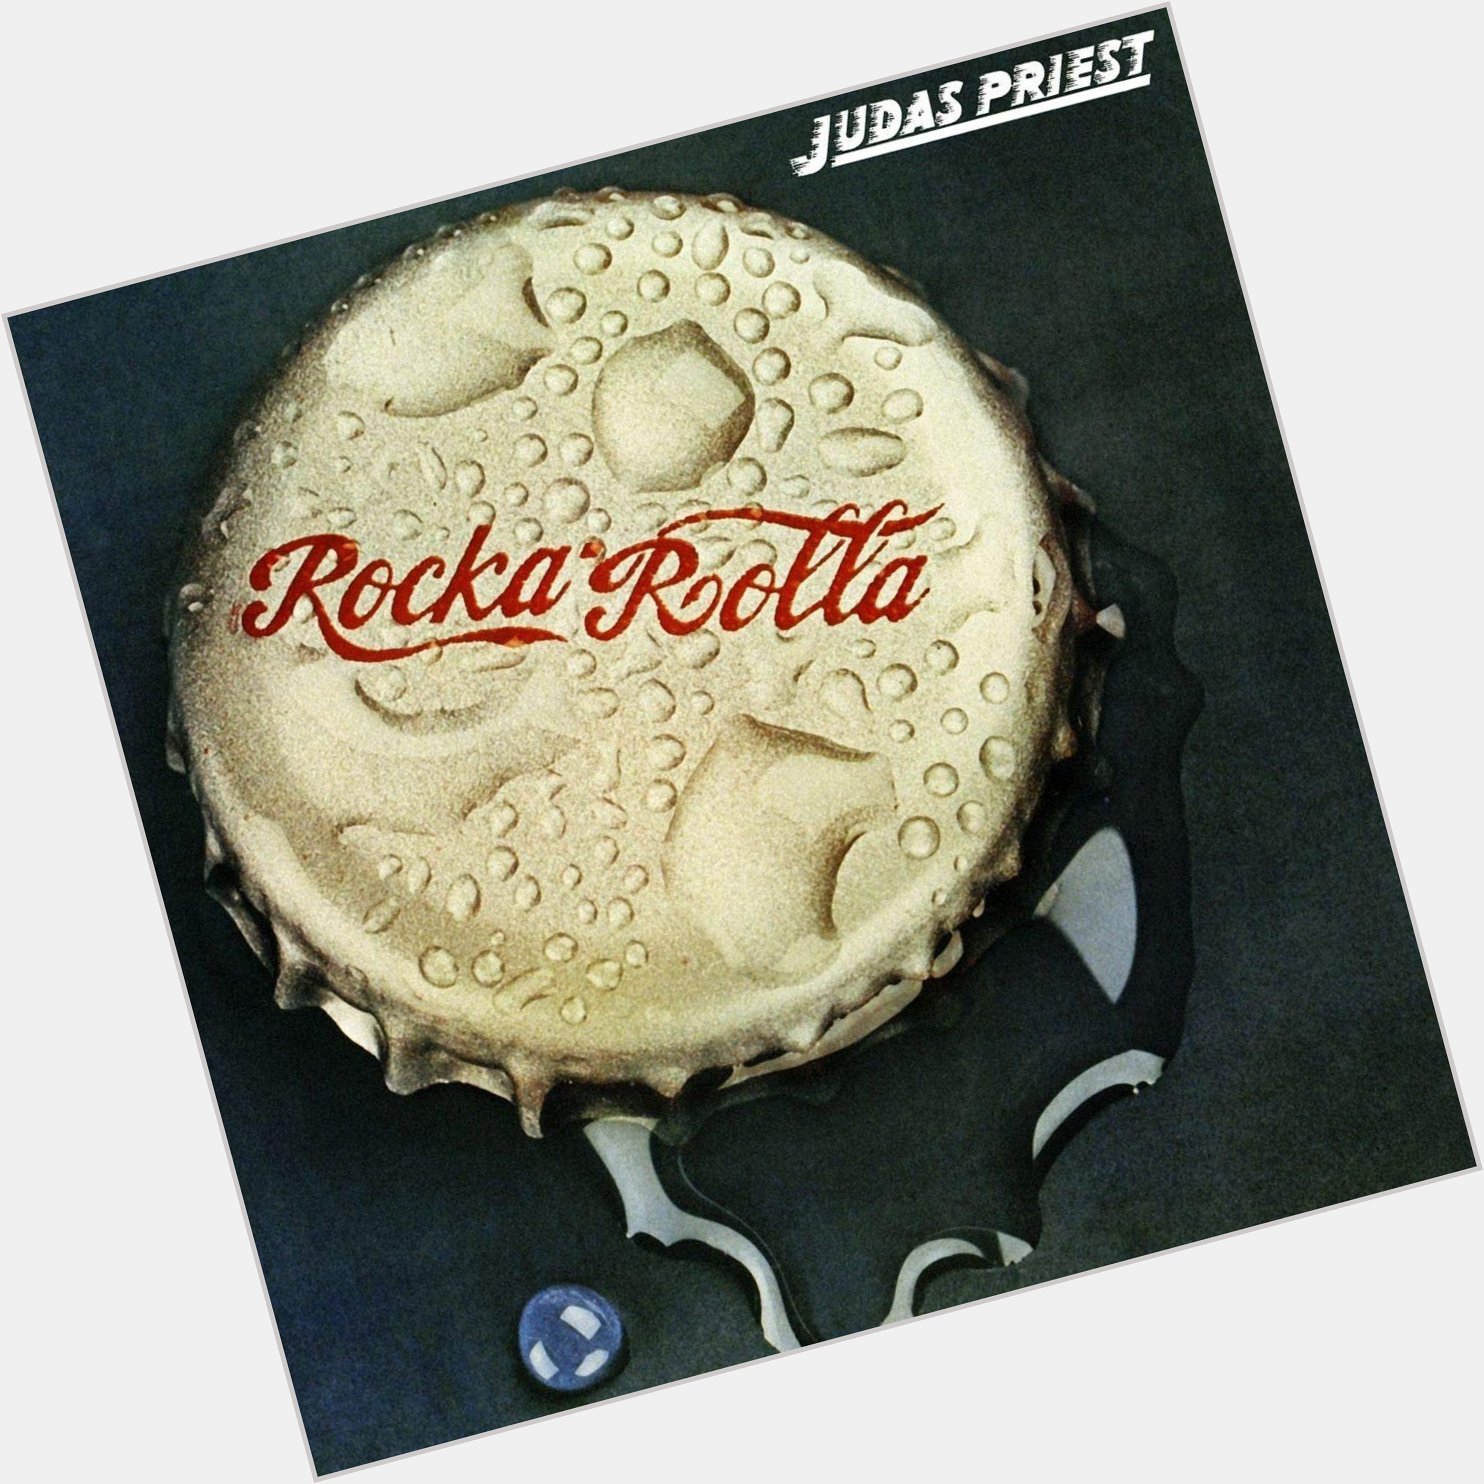  One For The Road
from Rocka Rolla
by Judas Priest

Happy Birthday, Rob Halford 